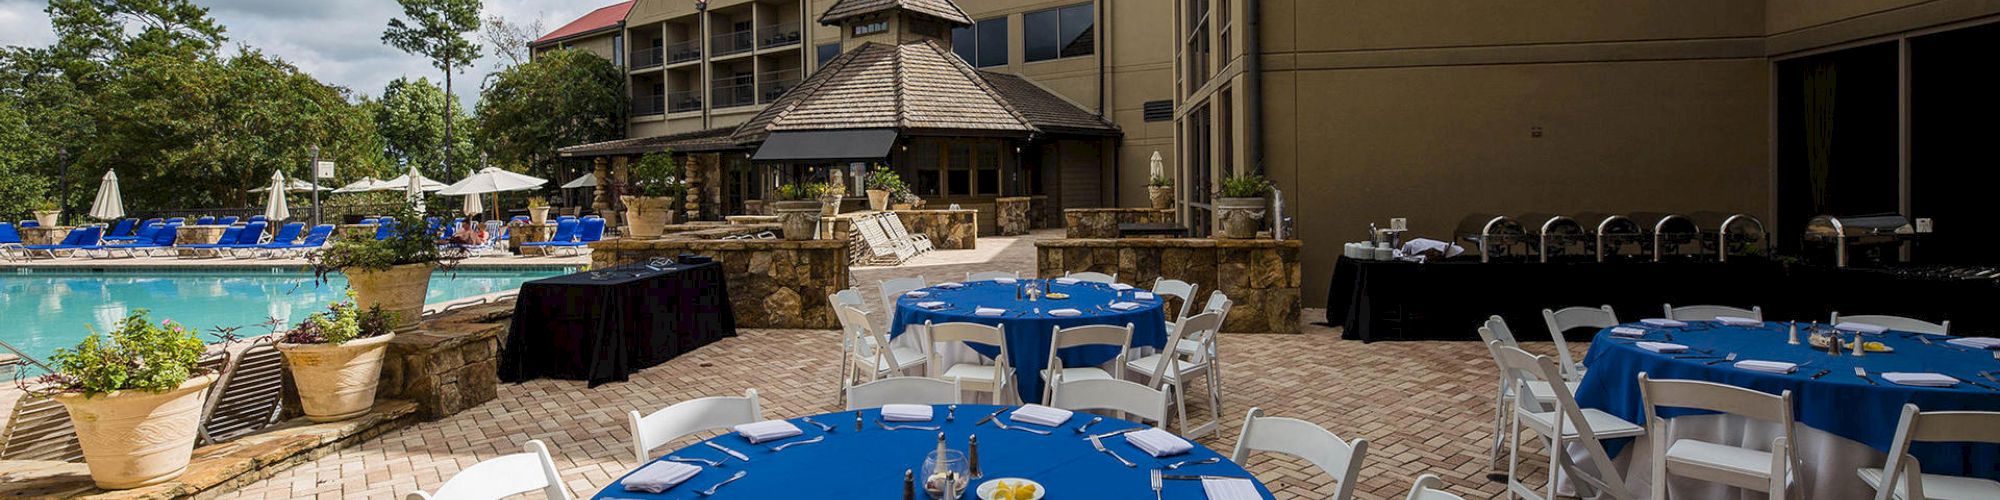 An outdoor dining setup by a pool with round tables covered in blue tablecloths and white chairs, located near a multi-story building.